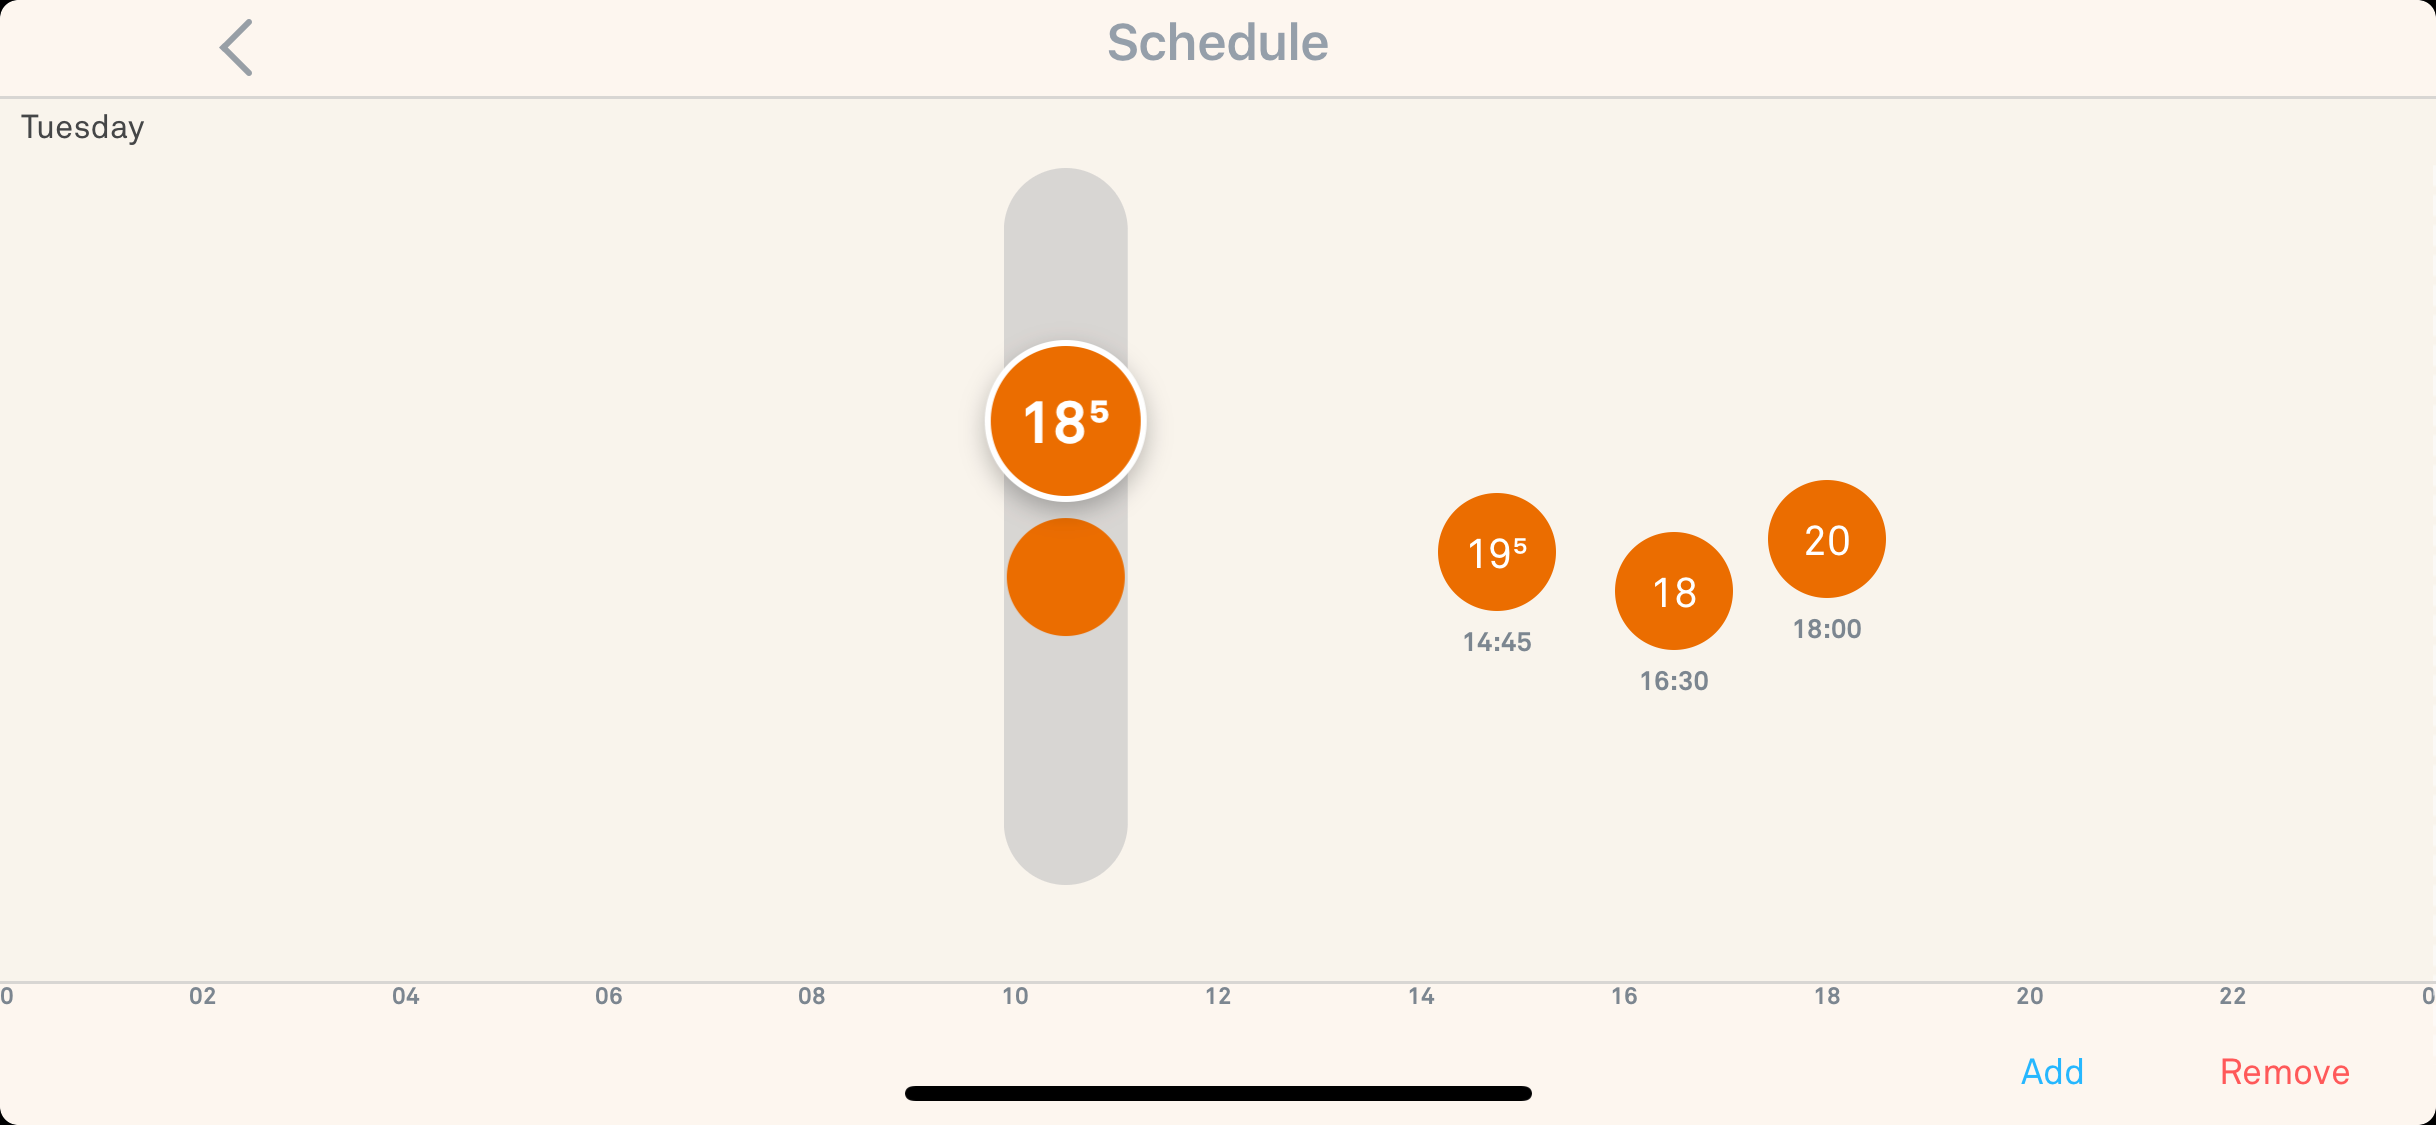 Nest Learning Thermostat 3rd Generation schedule